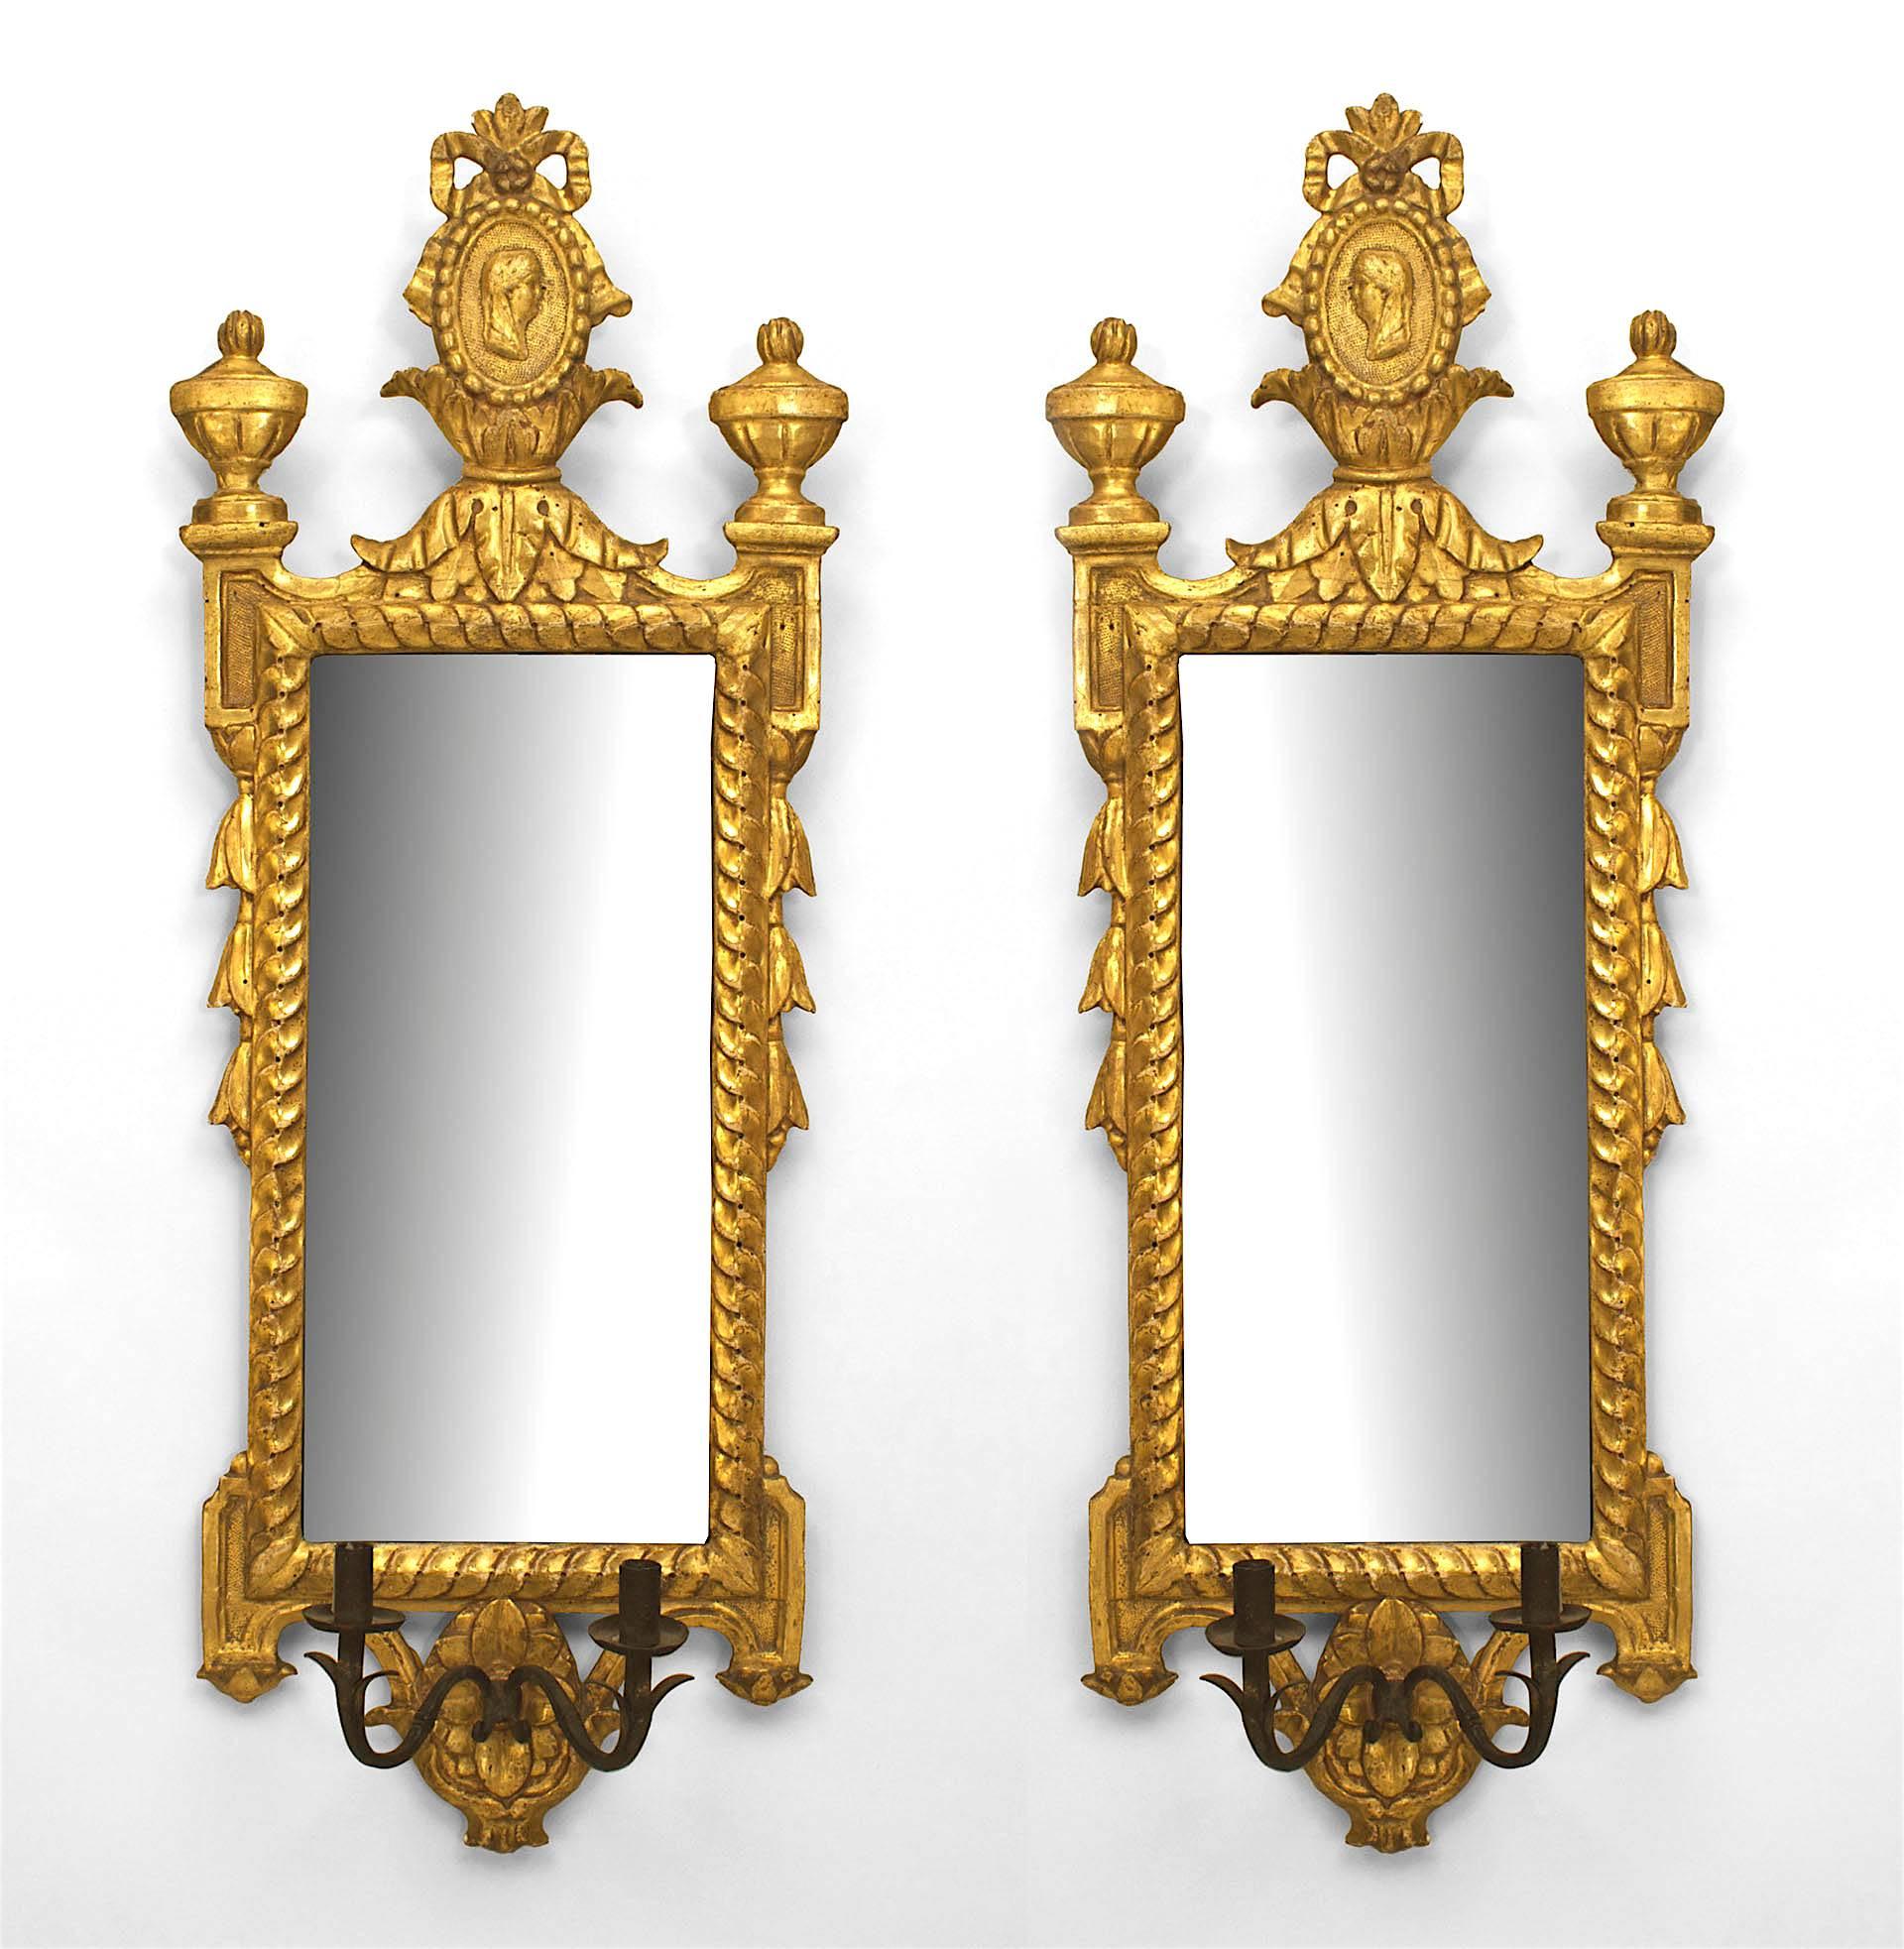 Pair of Italian Neoclassic (18th/19th Century) giltwood wall mirrors / girandoles with two wrought iron arms with lights at the bottoms. (PRICED AS Pair)
